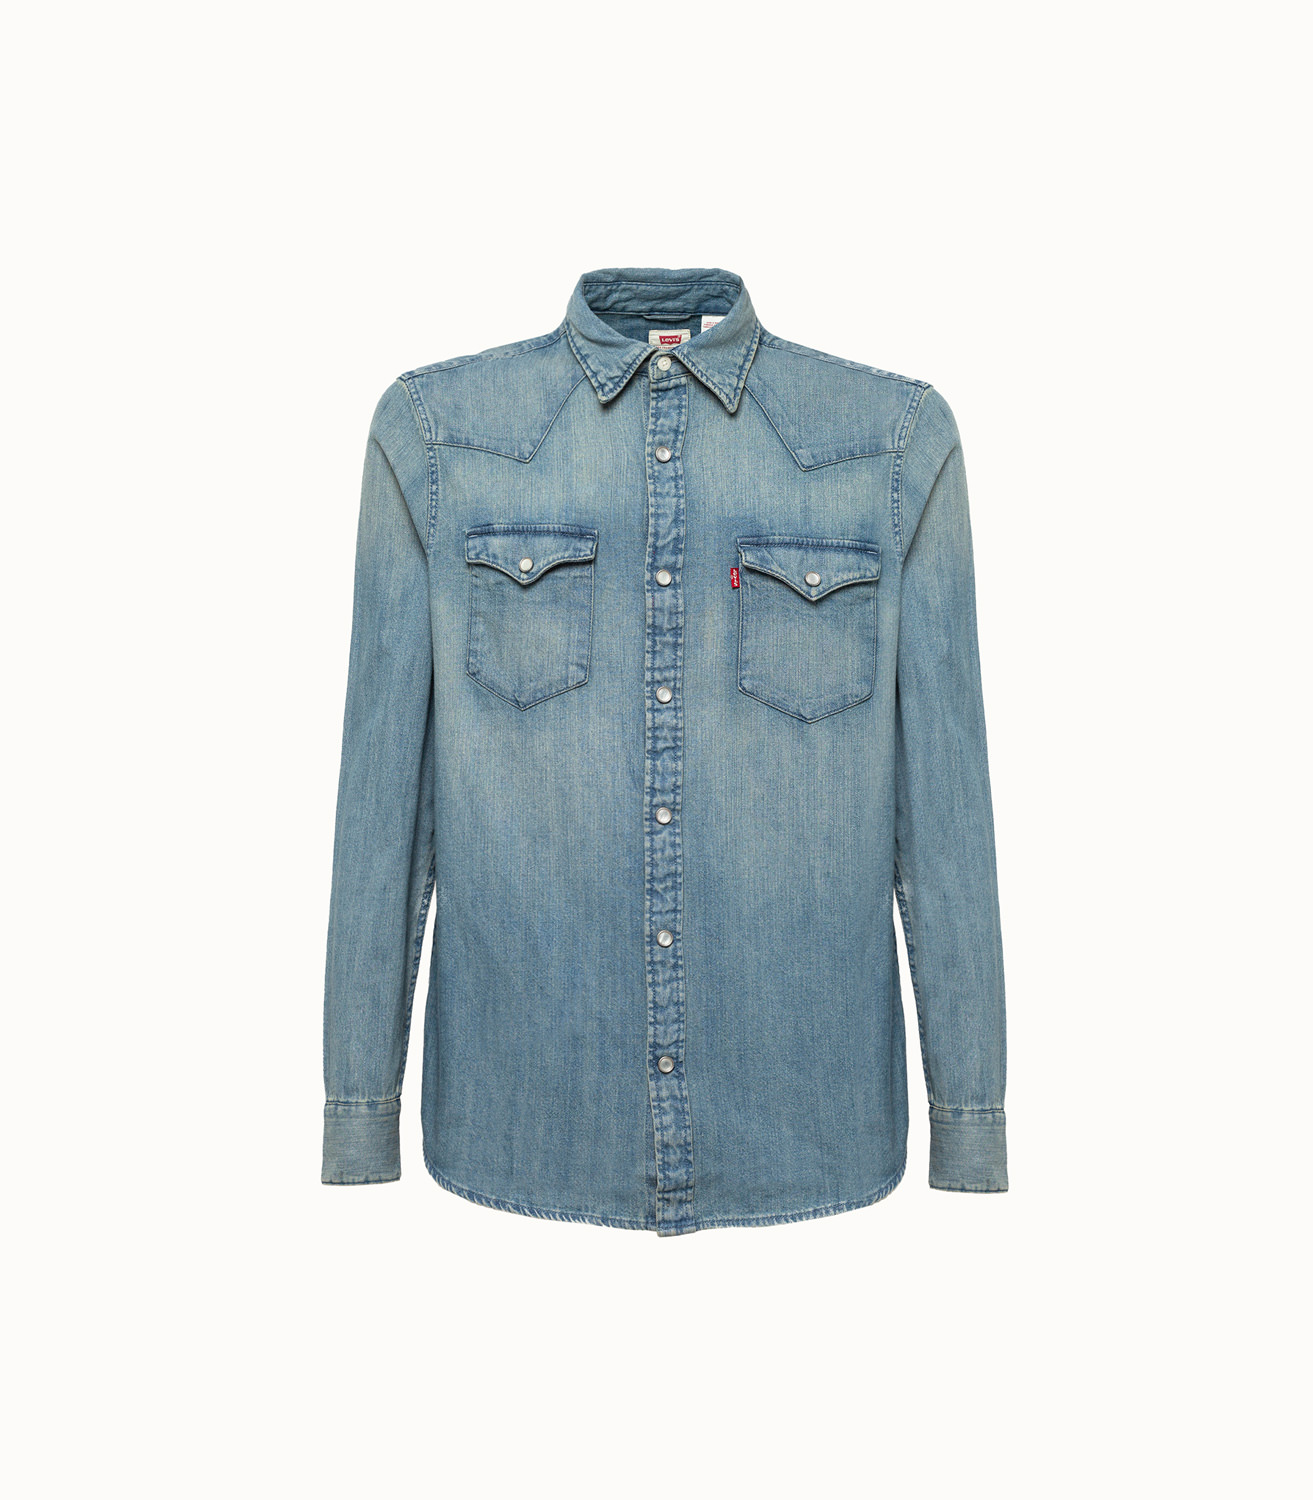 barstow western shirt levis